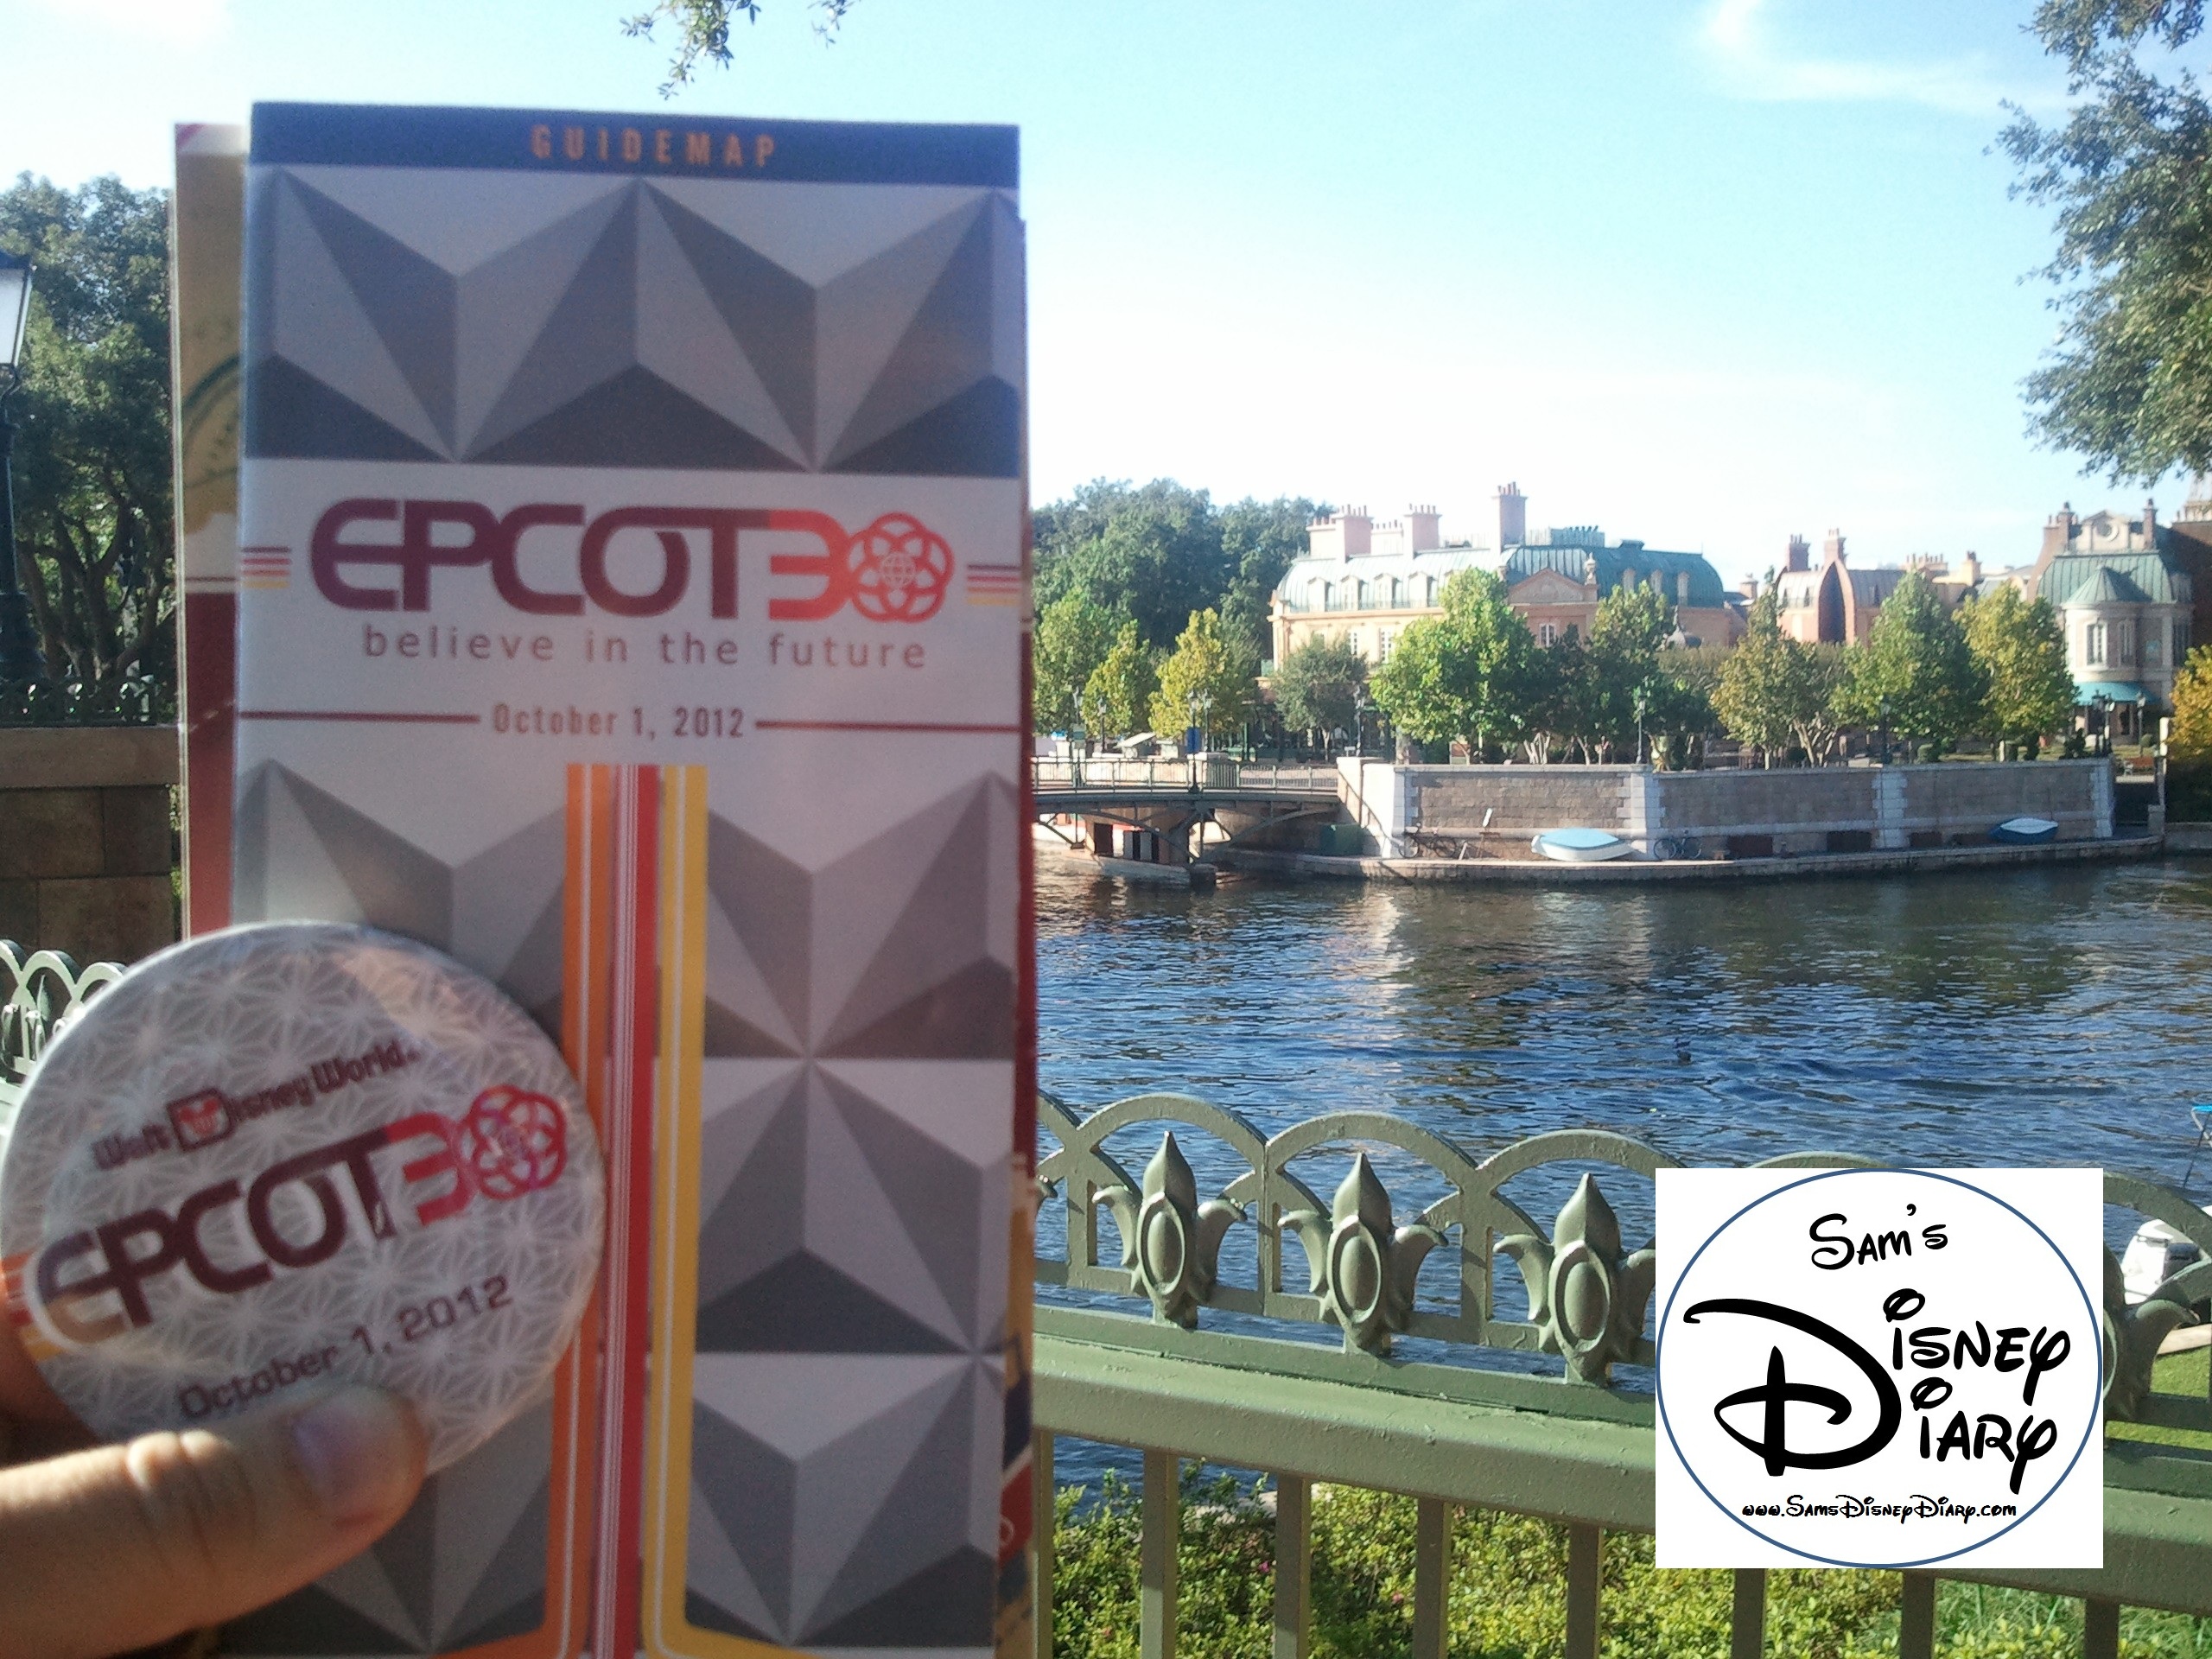 October 1, 2012 Epcot30 Button and Guidemap